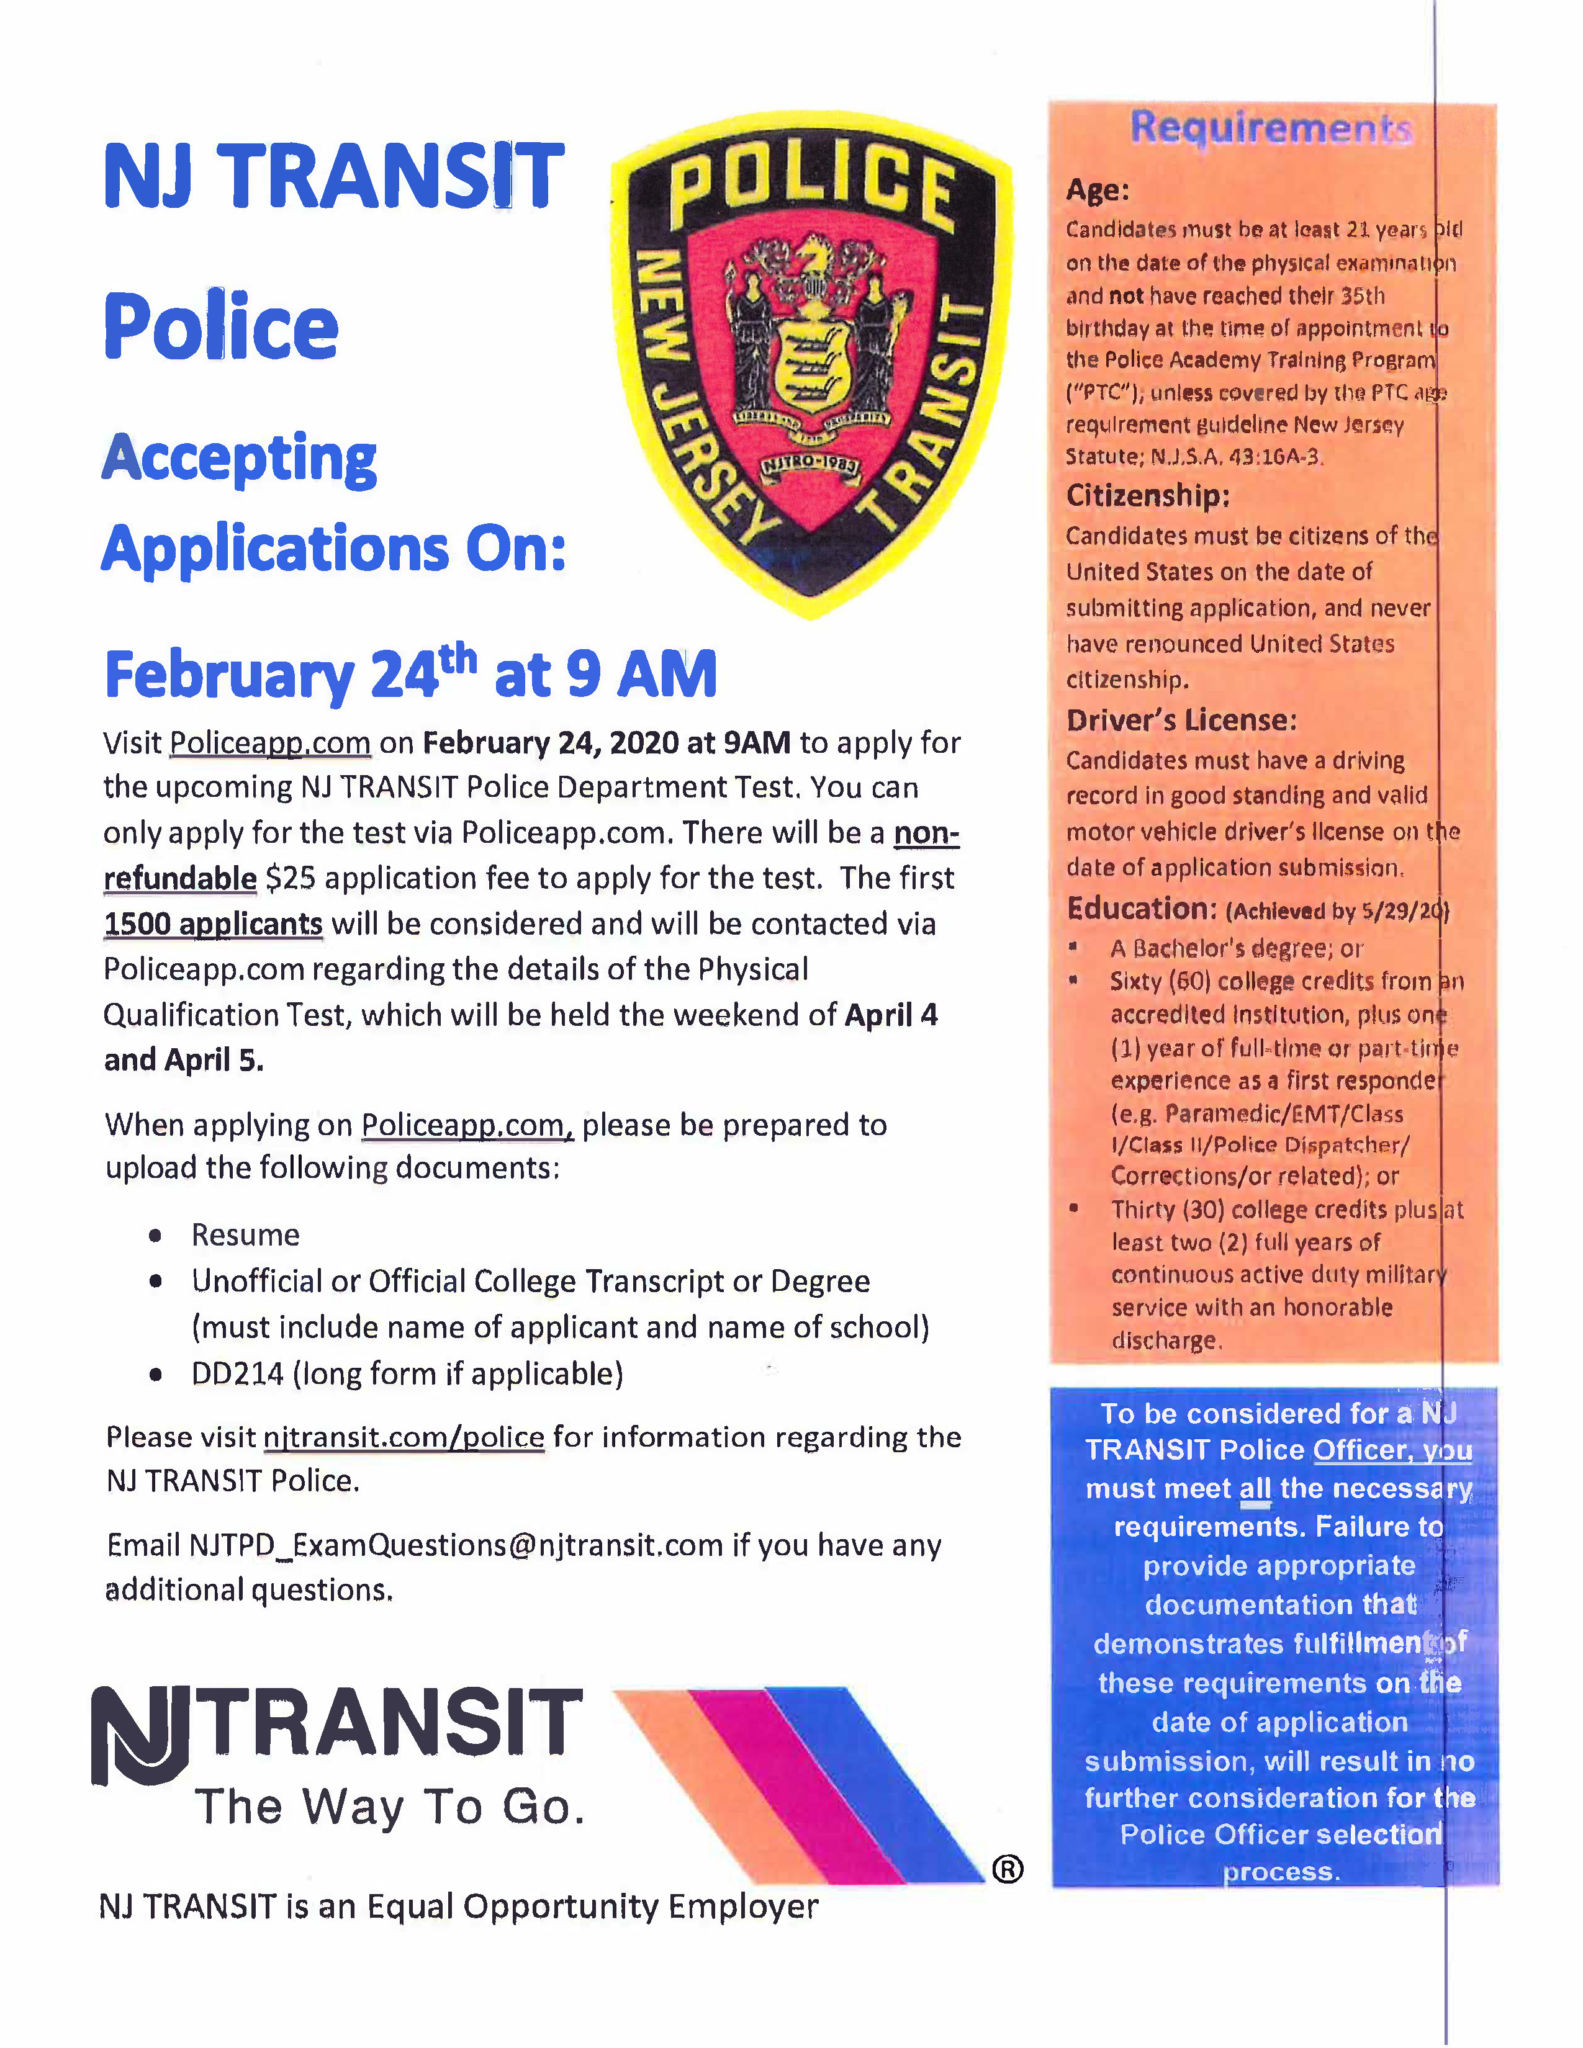 NJ TRANSIT Police Accepting Applications On Mon Feb 24th Bergen County New Jersey American